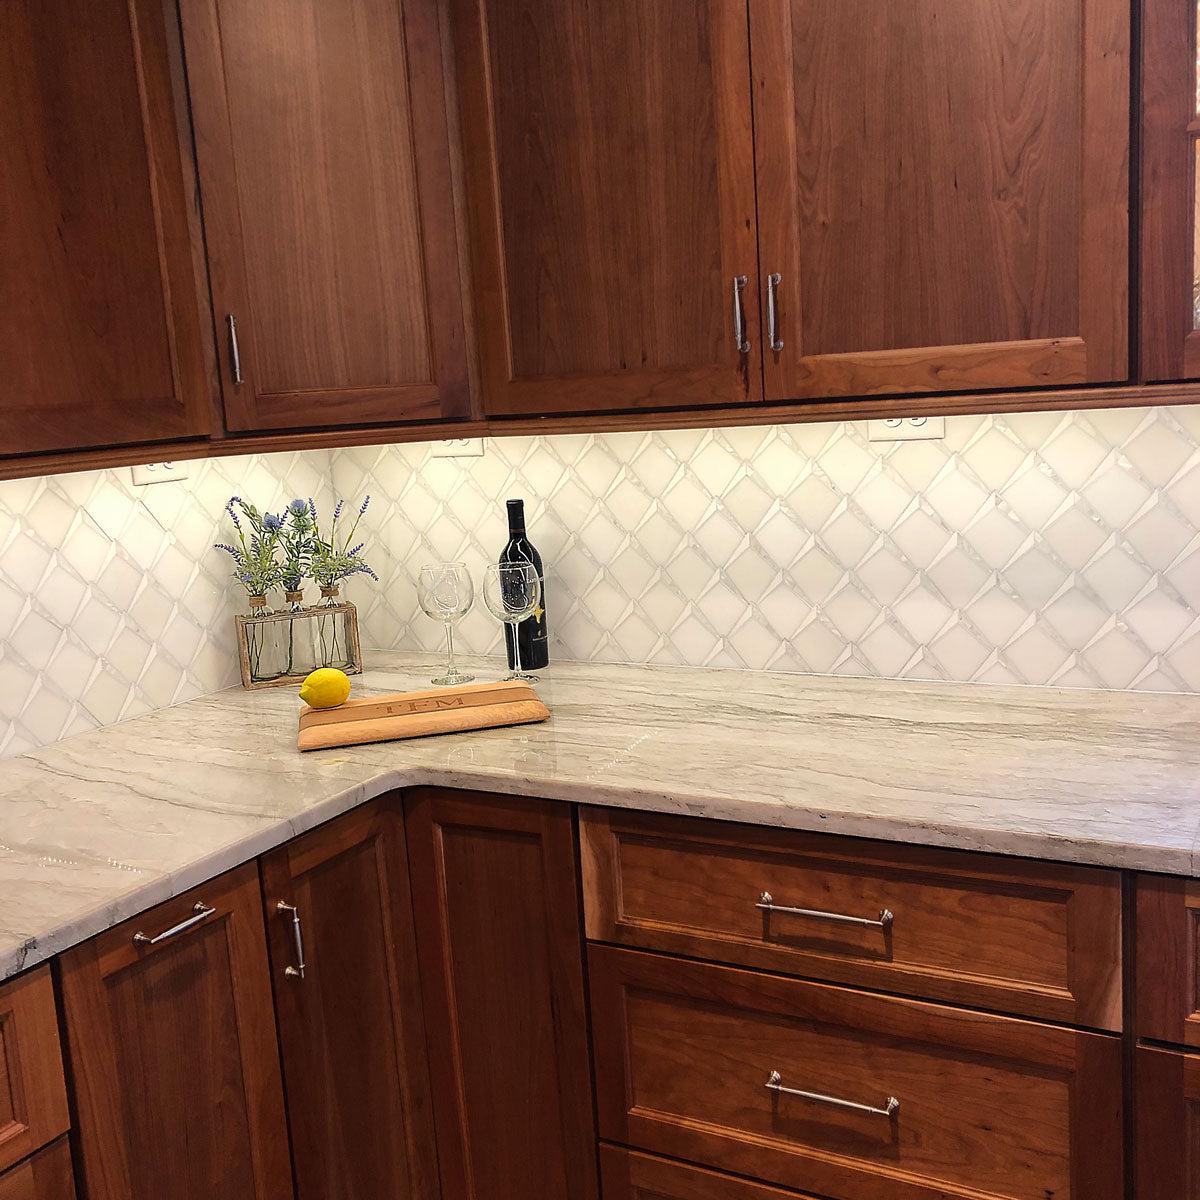 Arrowhead Pearl Marble Mosaic Kitchen Wall Tile with warm wood cabinets